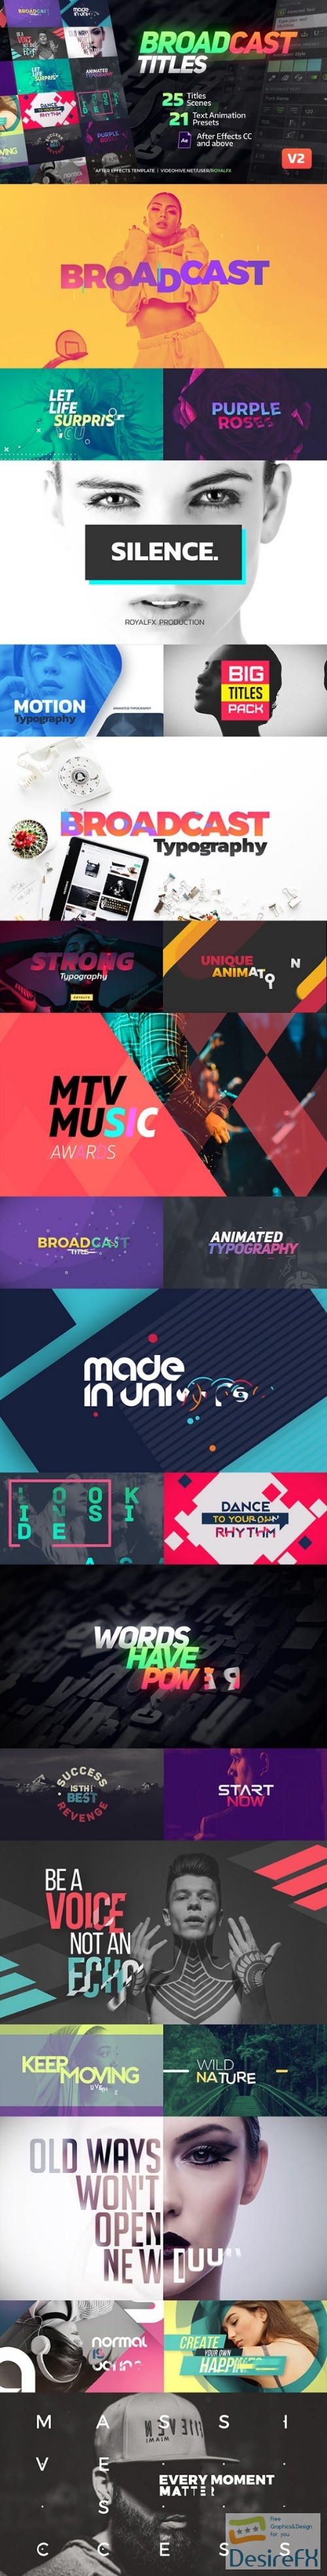 Videohive TypeX - Text Animation Tool | Broadcast Pack: Modern Colorful Typography Titles 20233979 - V.2